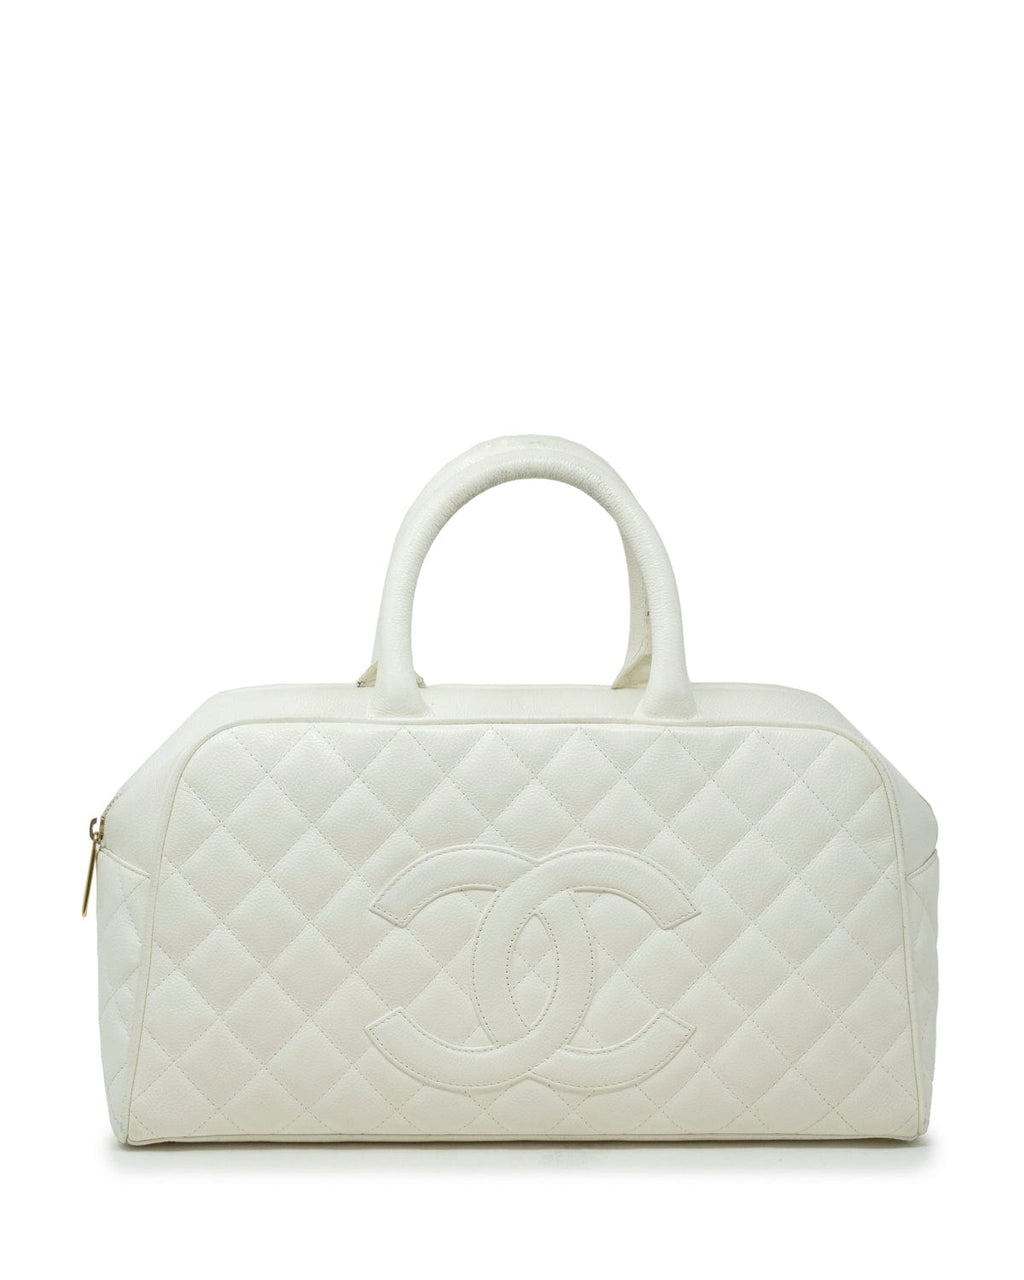 Chanel Chanel Mini Boston Pink Quilted Caviar Leather Hand Bag